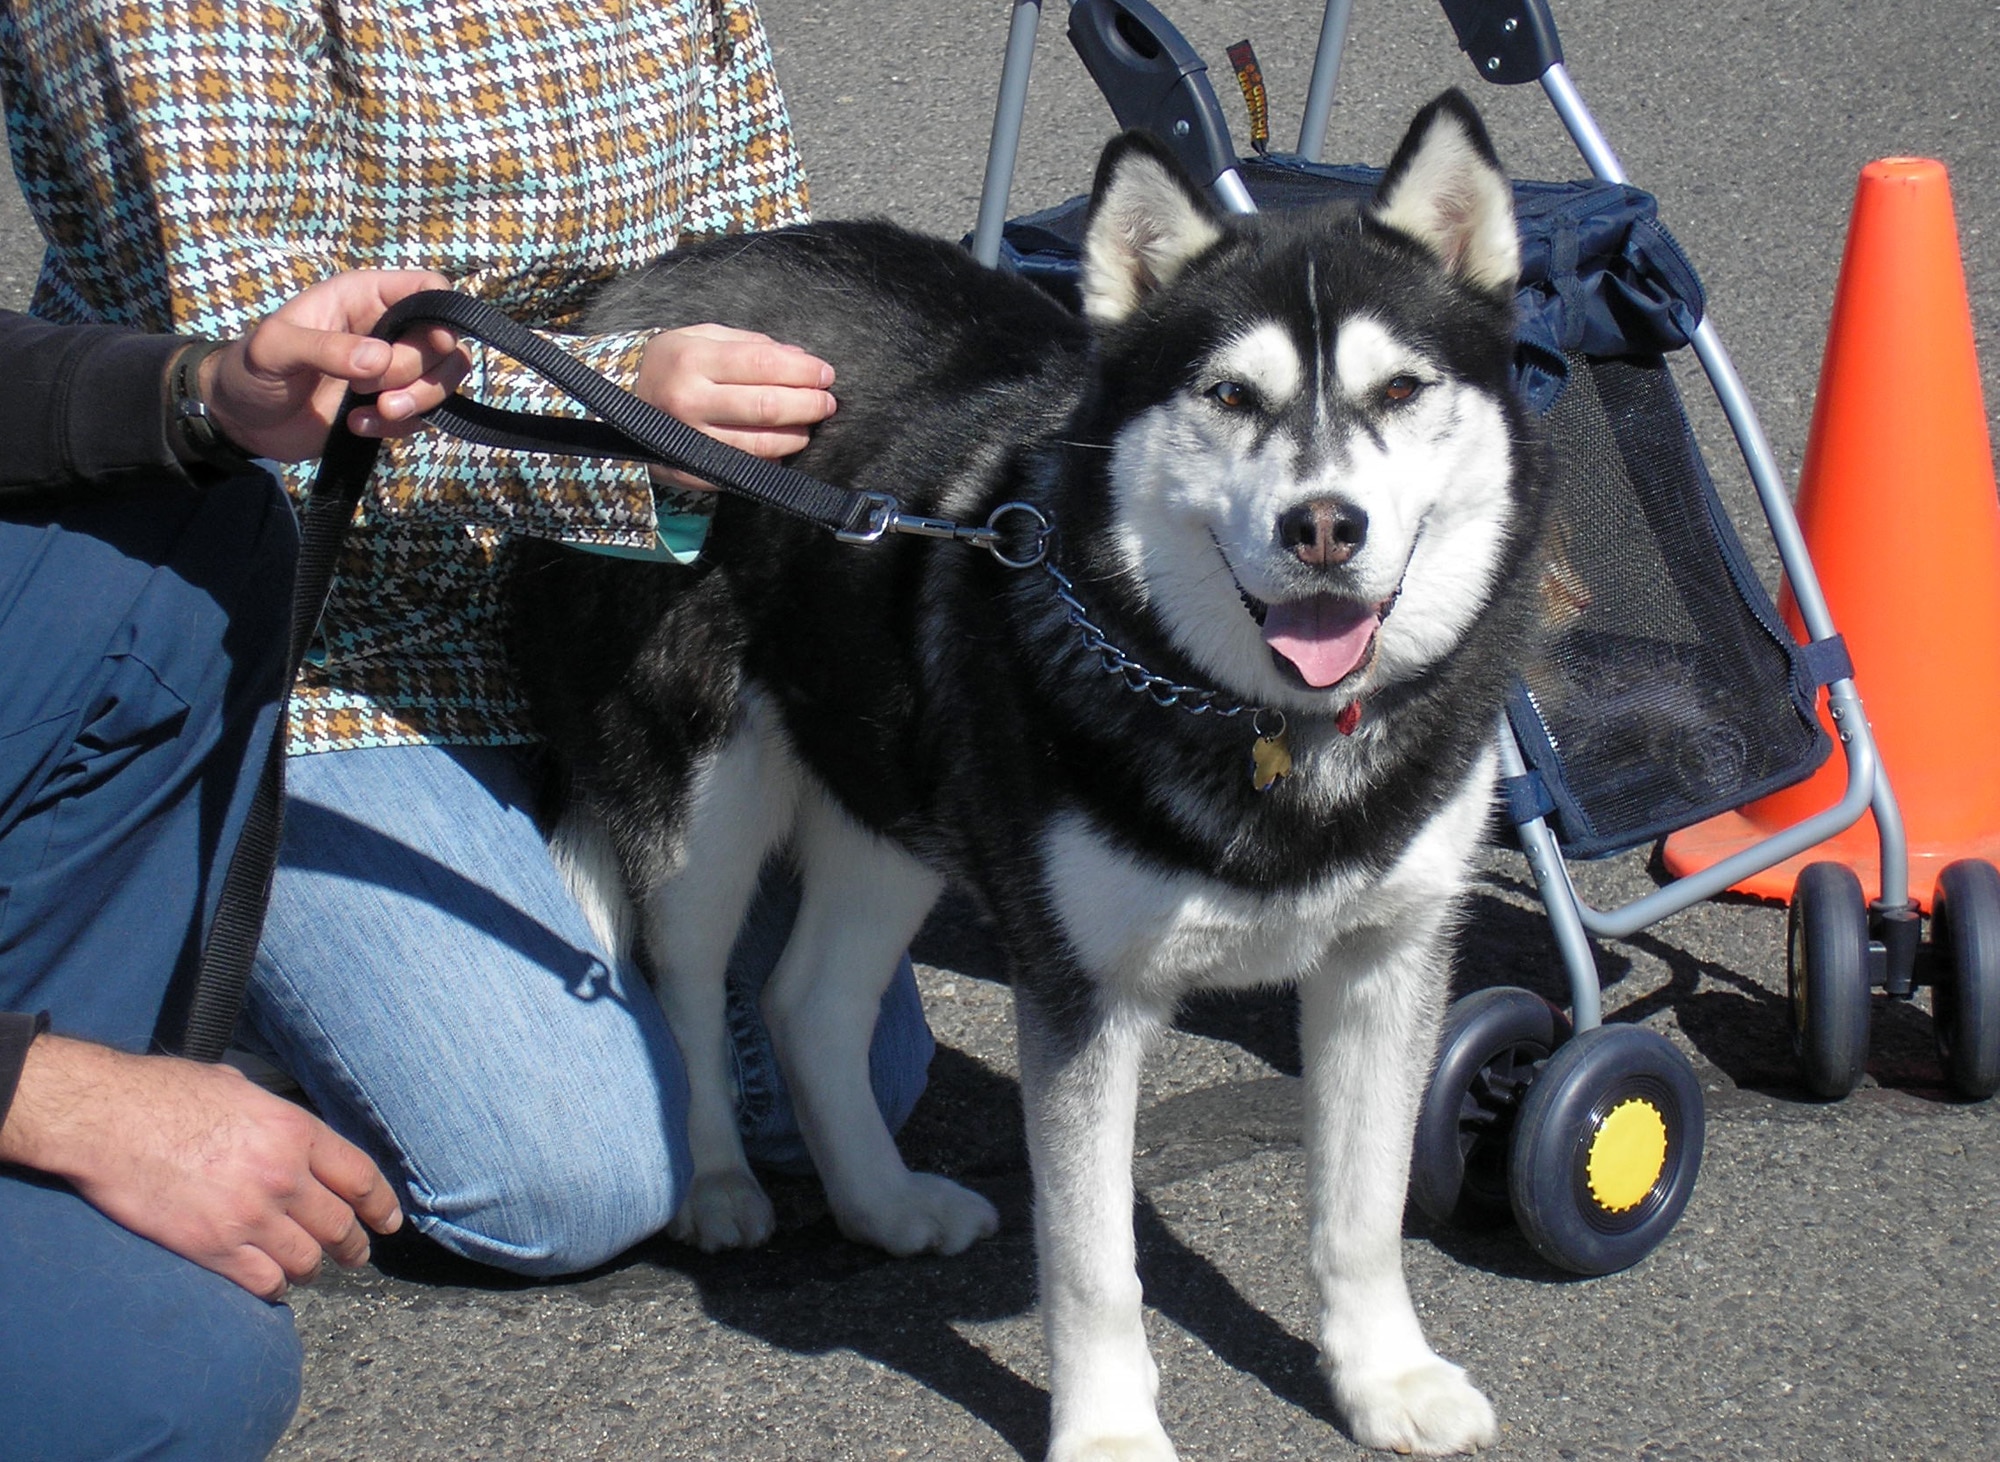 FAIRCHILD AIR FORCE BASE, Wash. – Dante, a husky owned by Kristina Orellane, won first prize in the canine 51-99 lbs category at the Base Exchange pet show May 5. (Photo by Stephani Edington)
